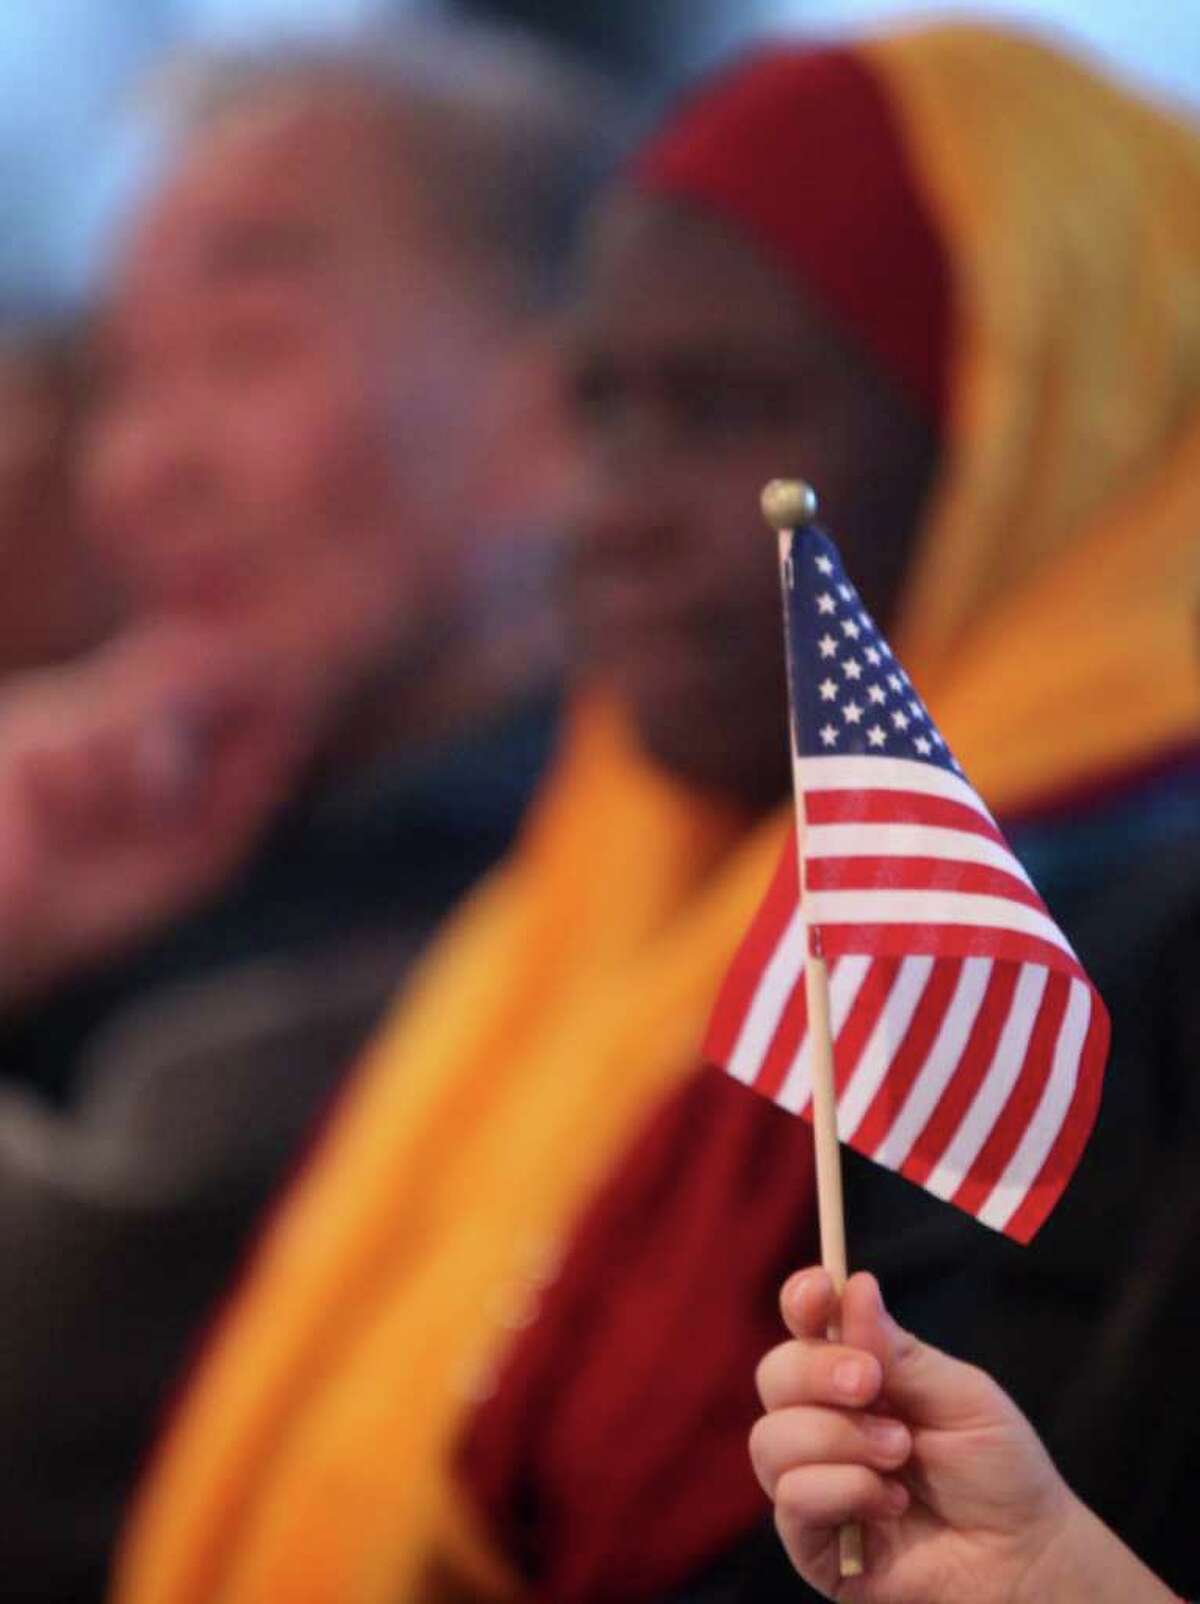 Taking on a new citizenship is one of the most solemn decisions a person can make. Take a look at scenes from Seattle citizenship ceremonies.